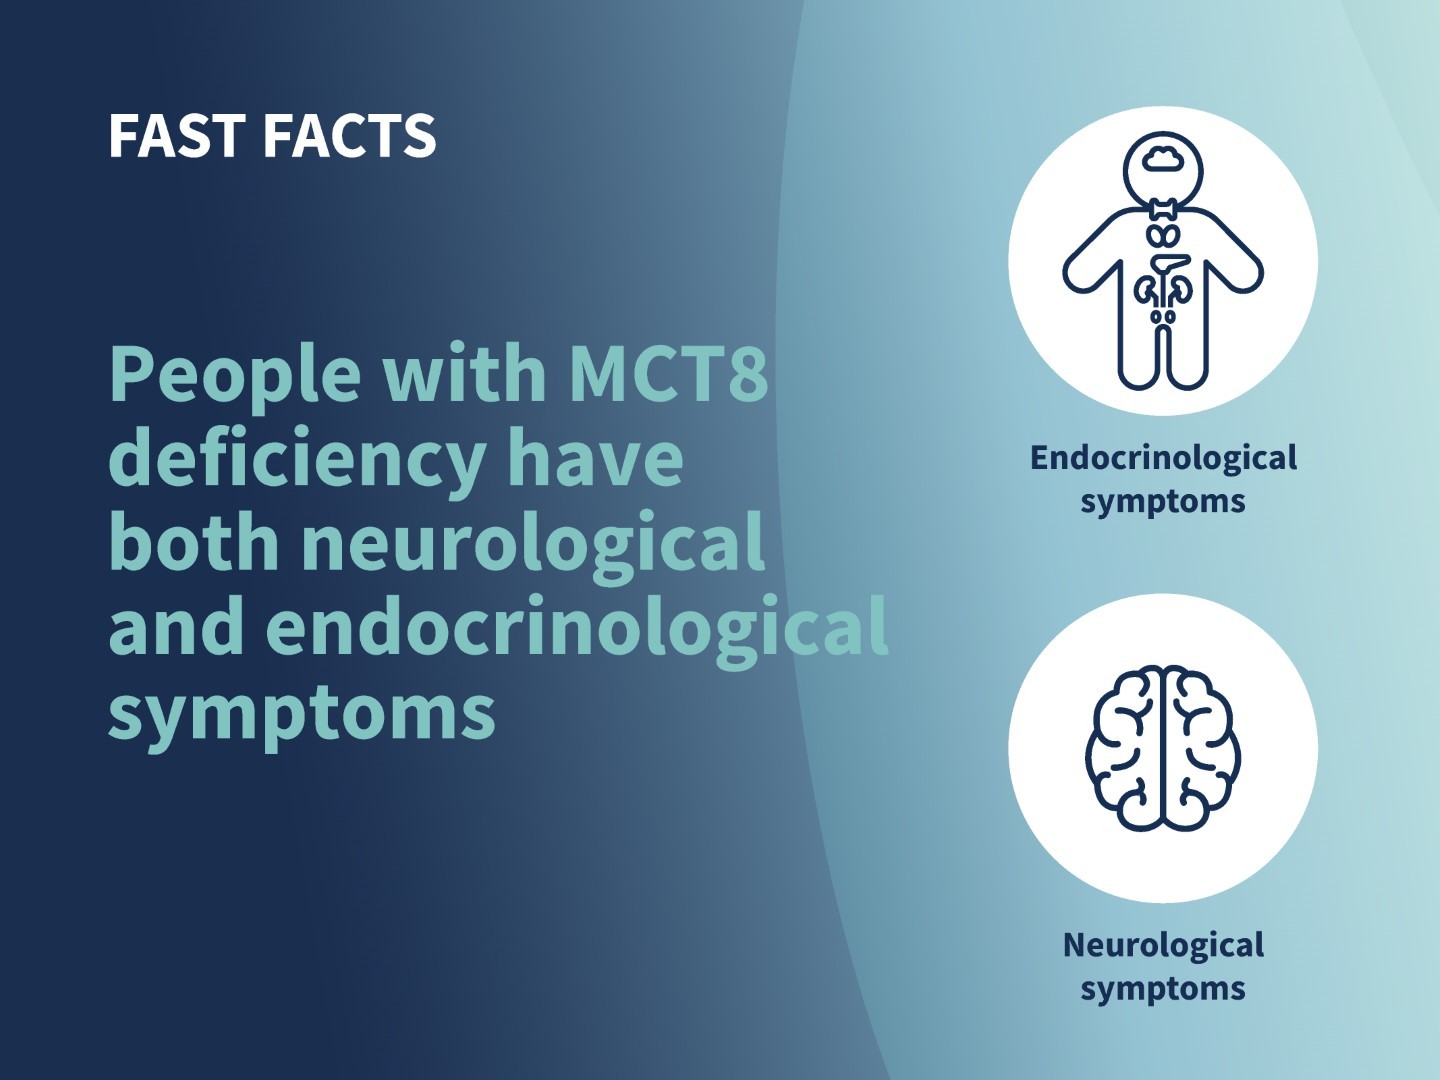 People with MCT8 deficiency have both neurological and endocrinological symptoms